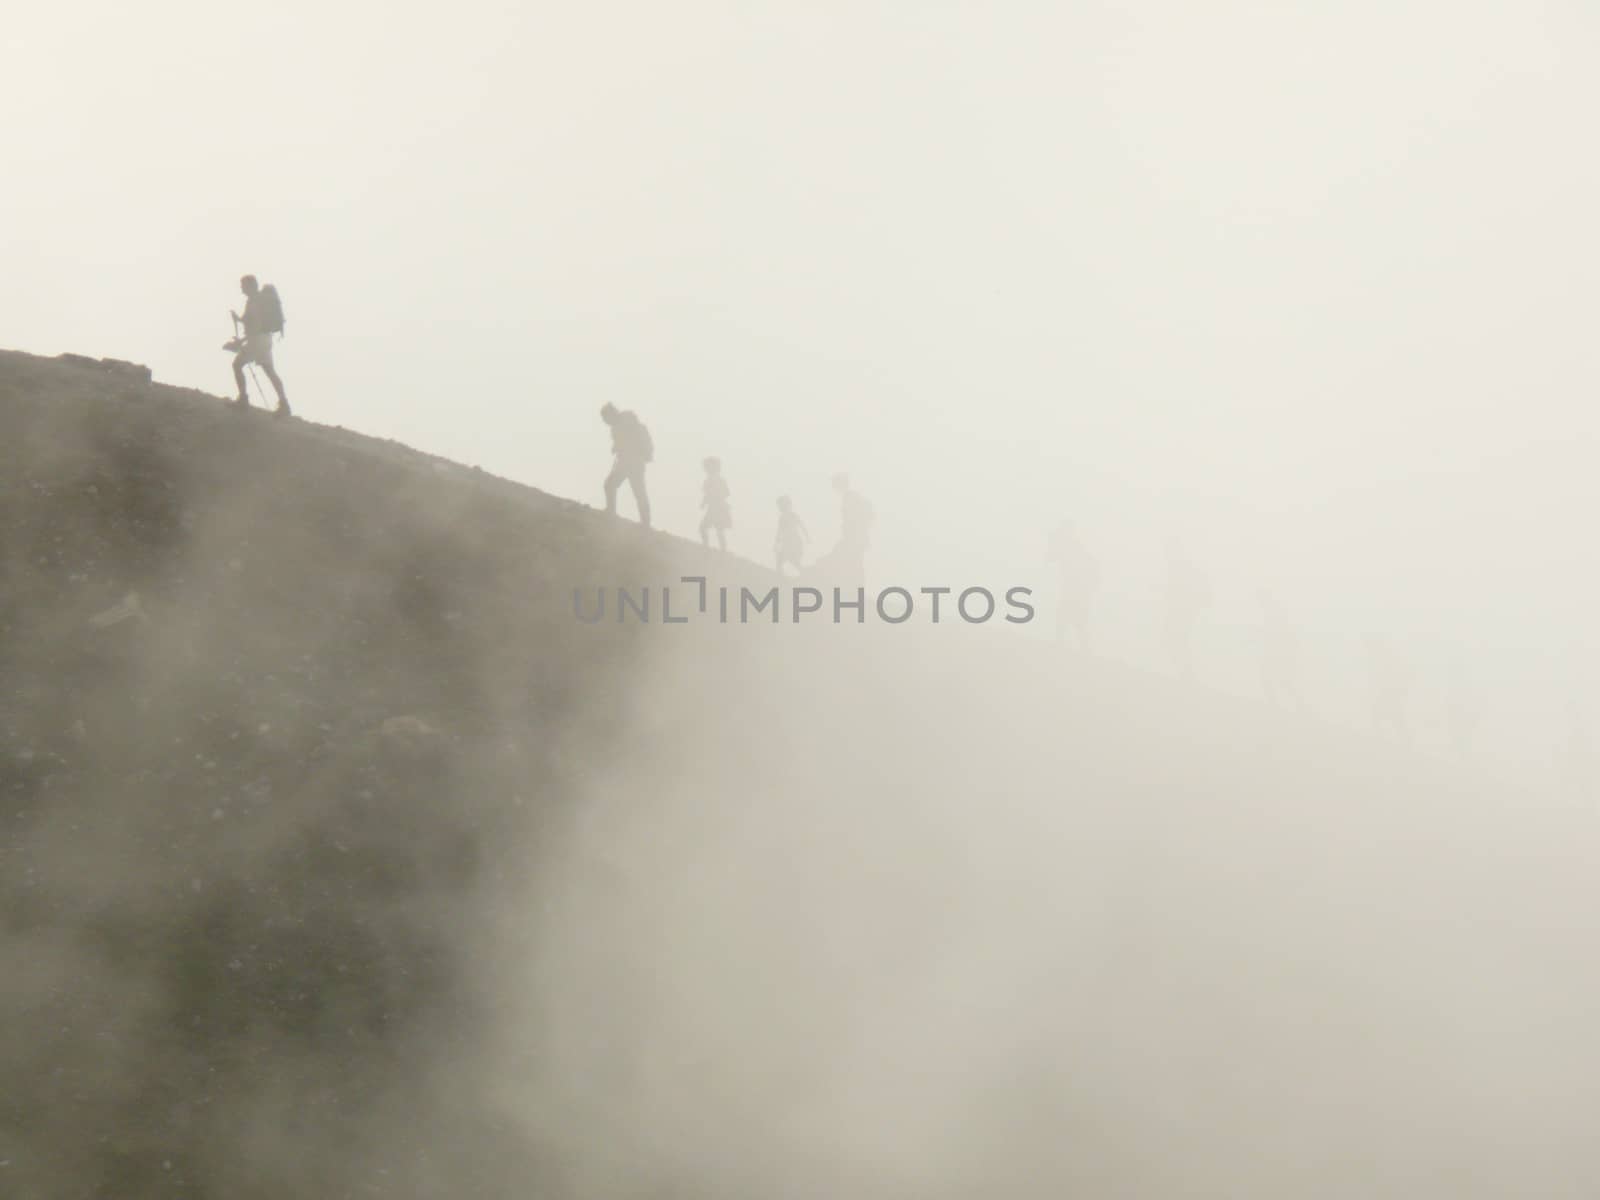 A group of mountaineers on the slopes of a mountain by Paolo_Grassi